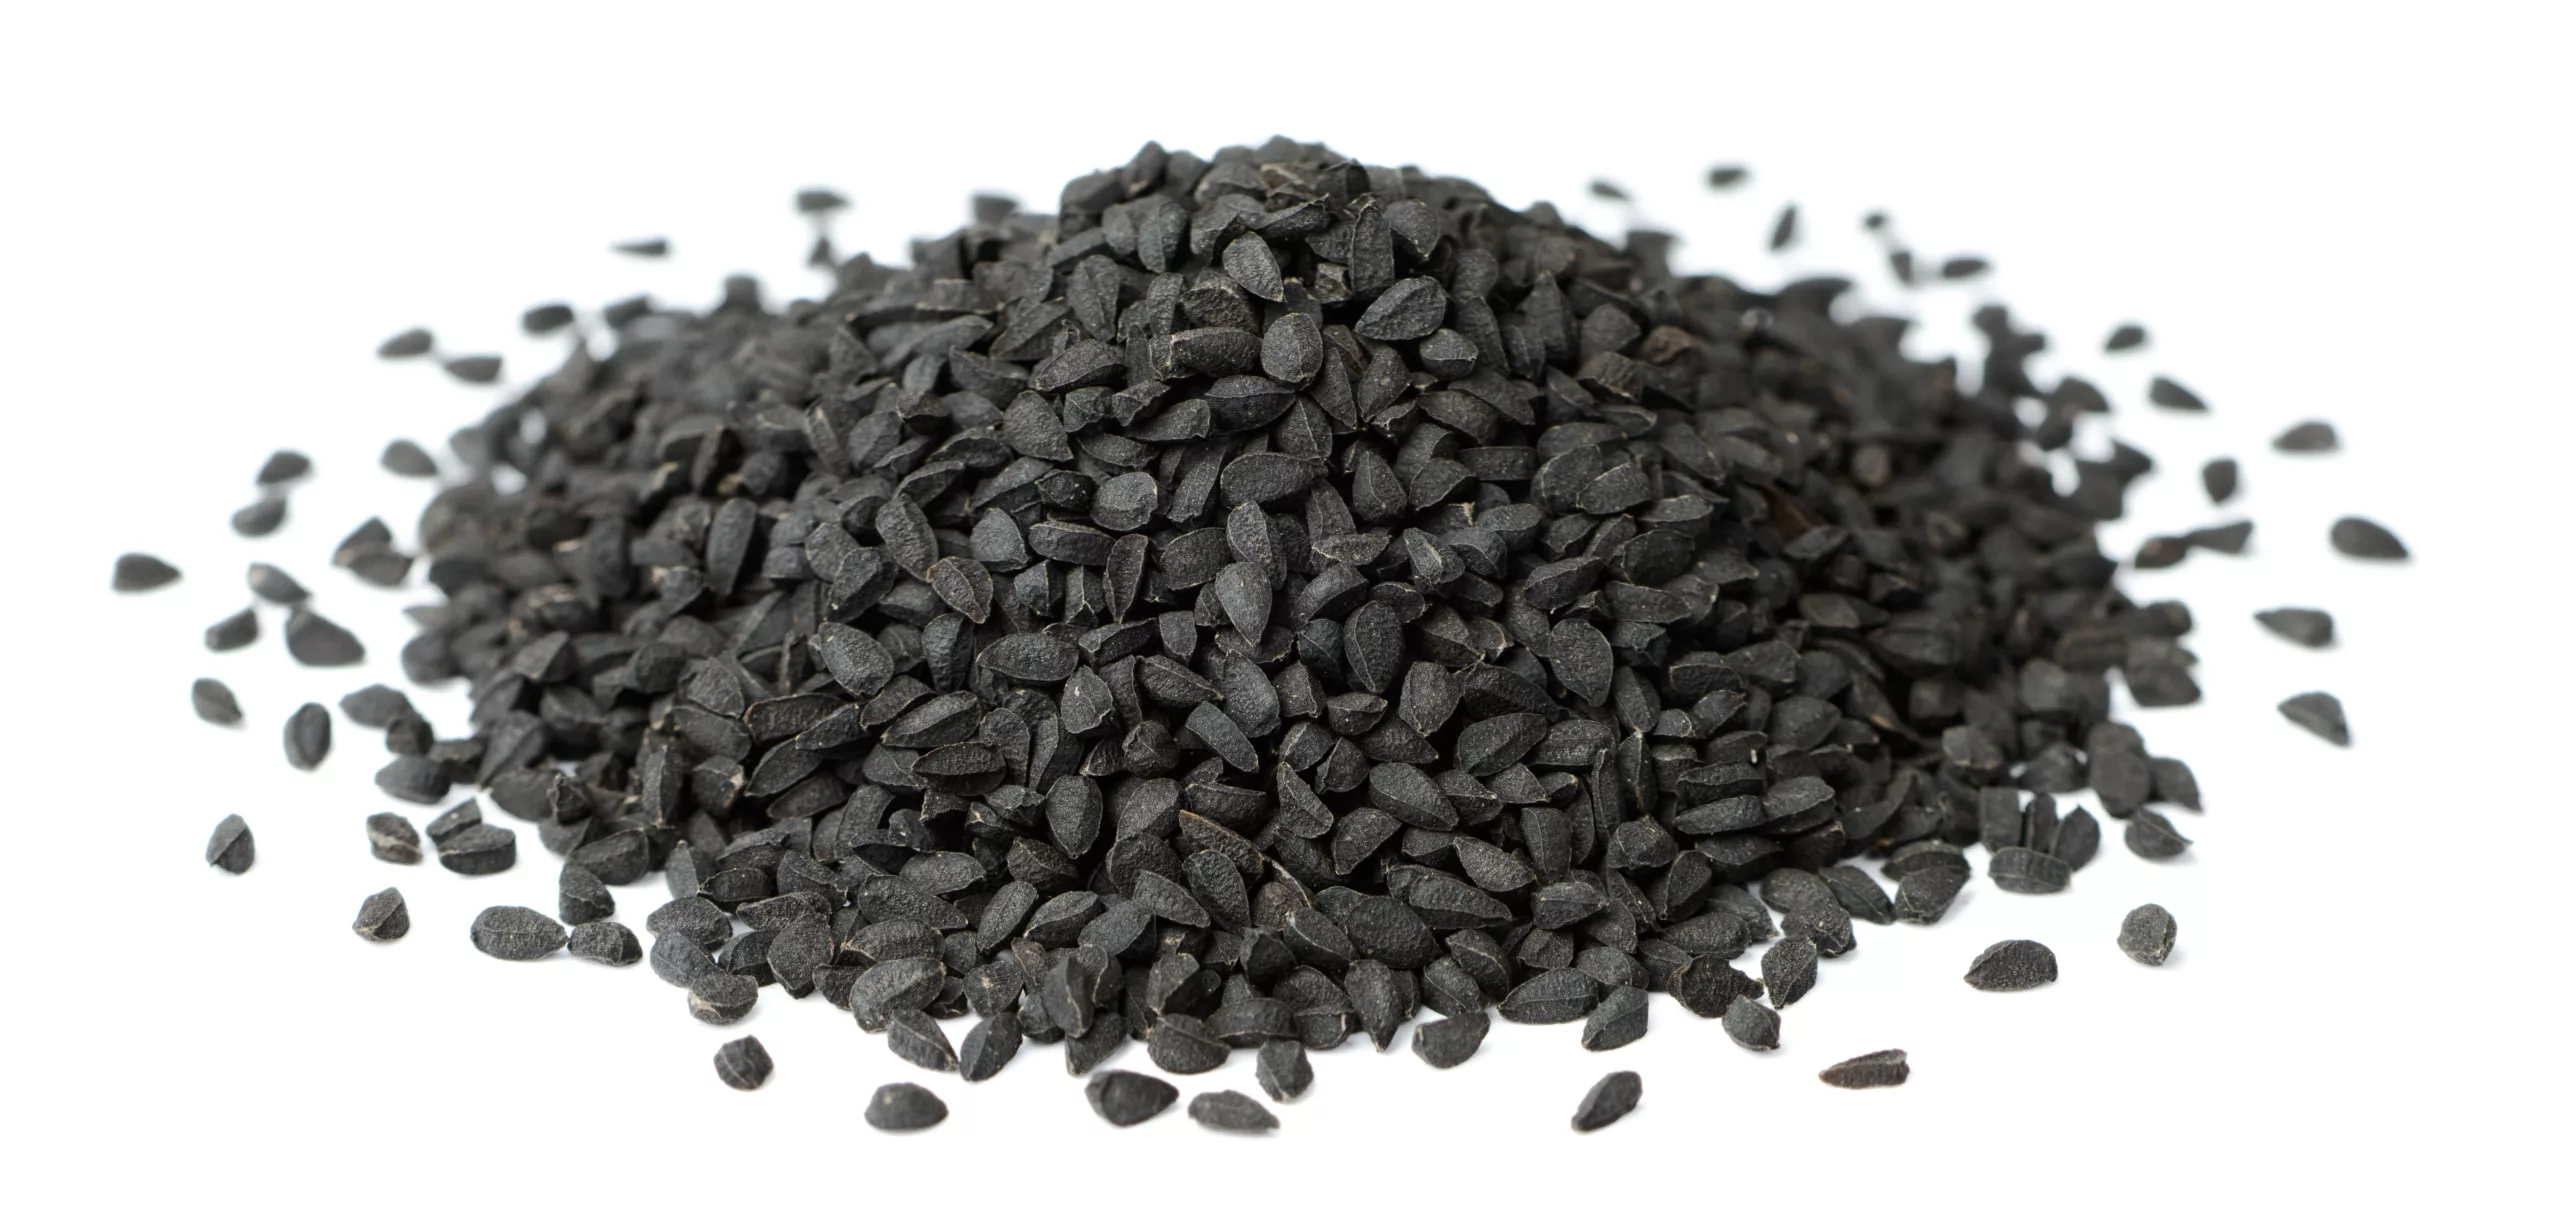 can dogs eat black cumin